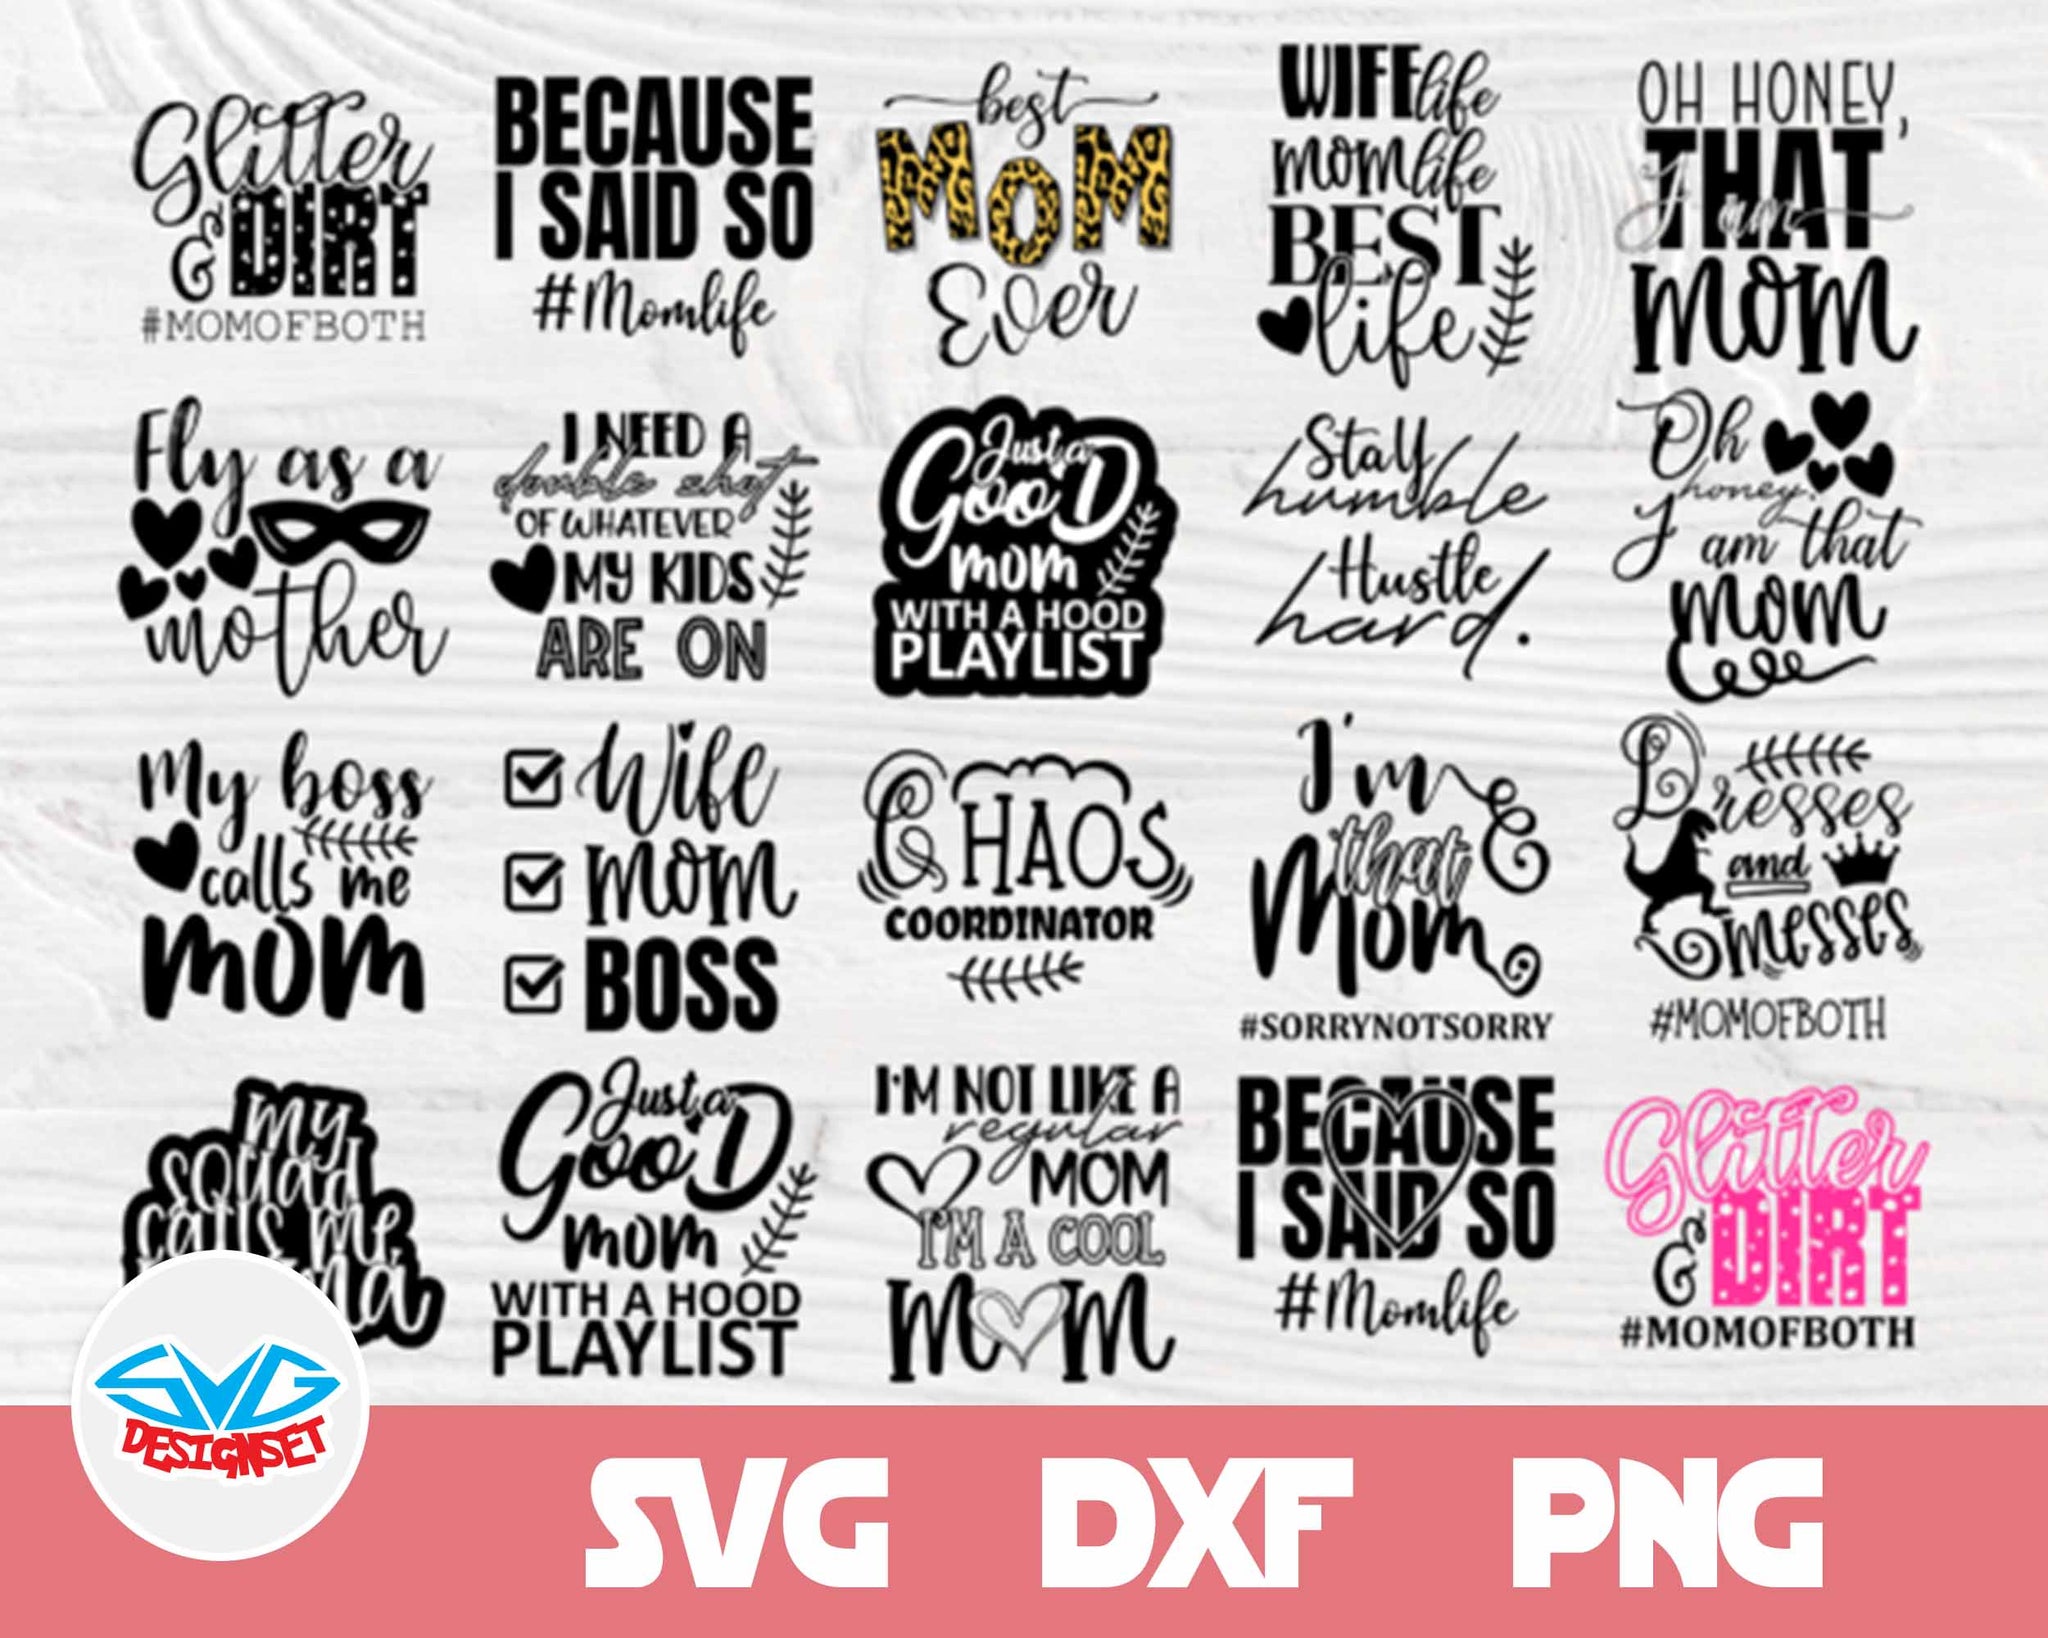 Mother's Day Svg, Dxf, Eps, Png, Clipart, Silhouette and Cutfiles #7 - SVGDesignSets